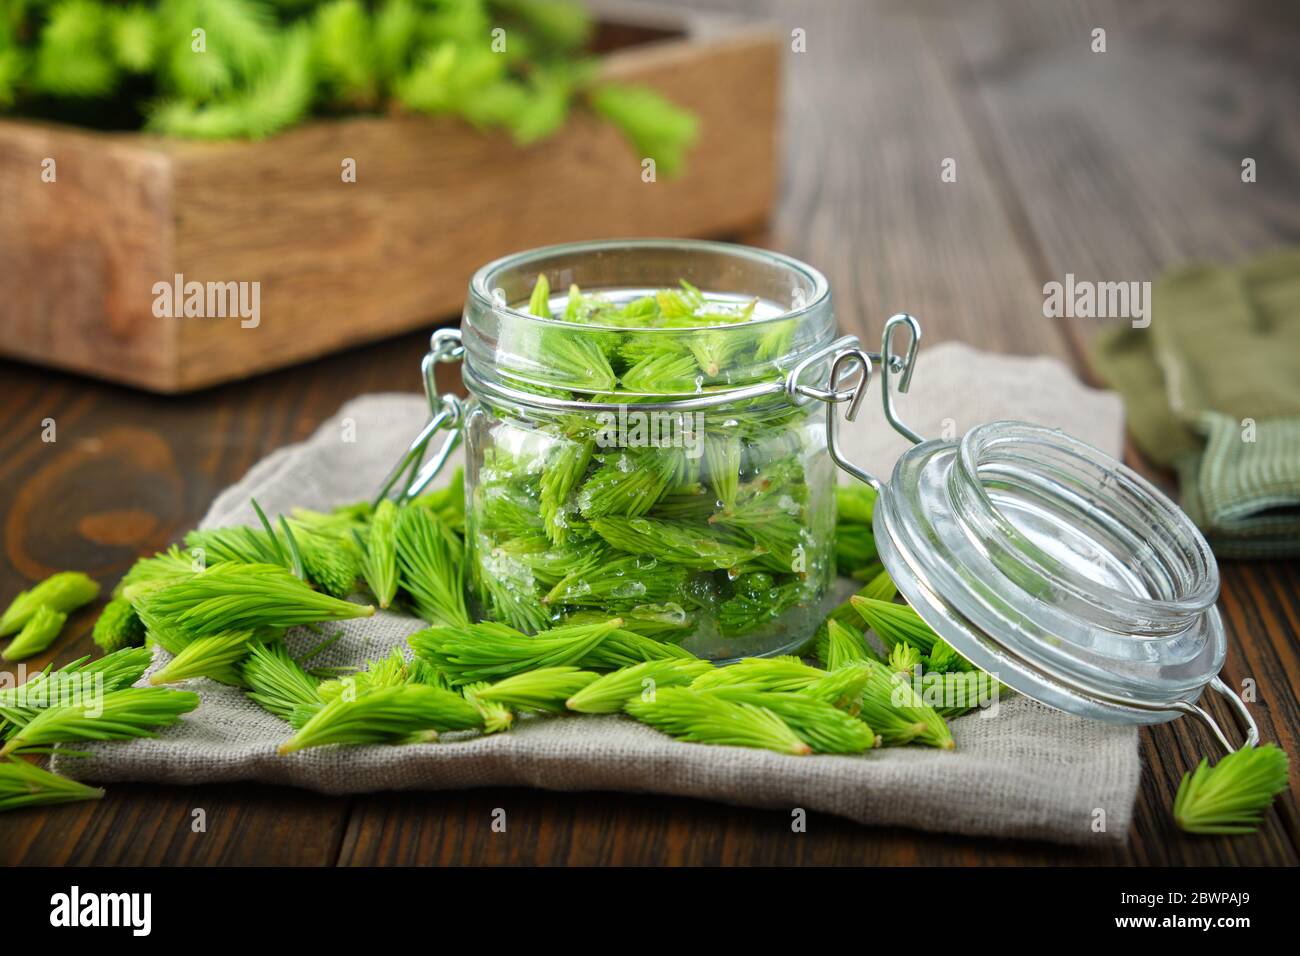 Jar of spruce tips for cooking syrup or honey from fir buds and needles, twigs of fir tree on wooden table. Making spruce tips drugs at home. Alternat Stock Photo